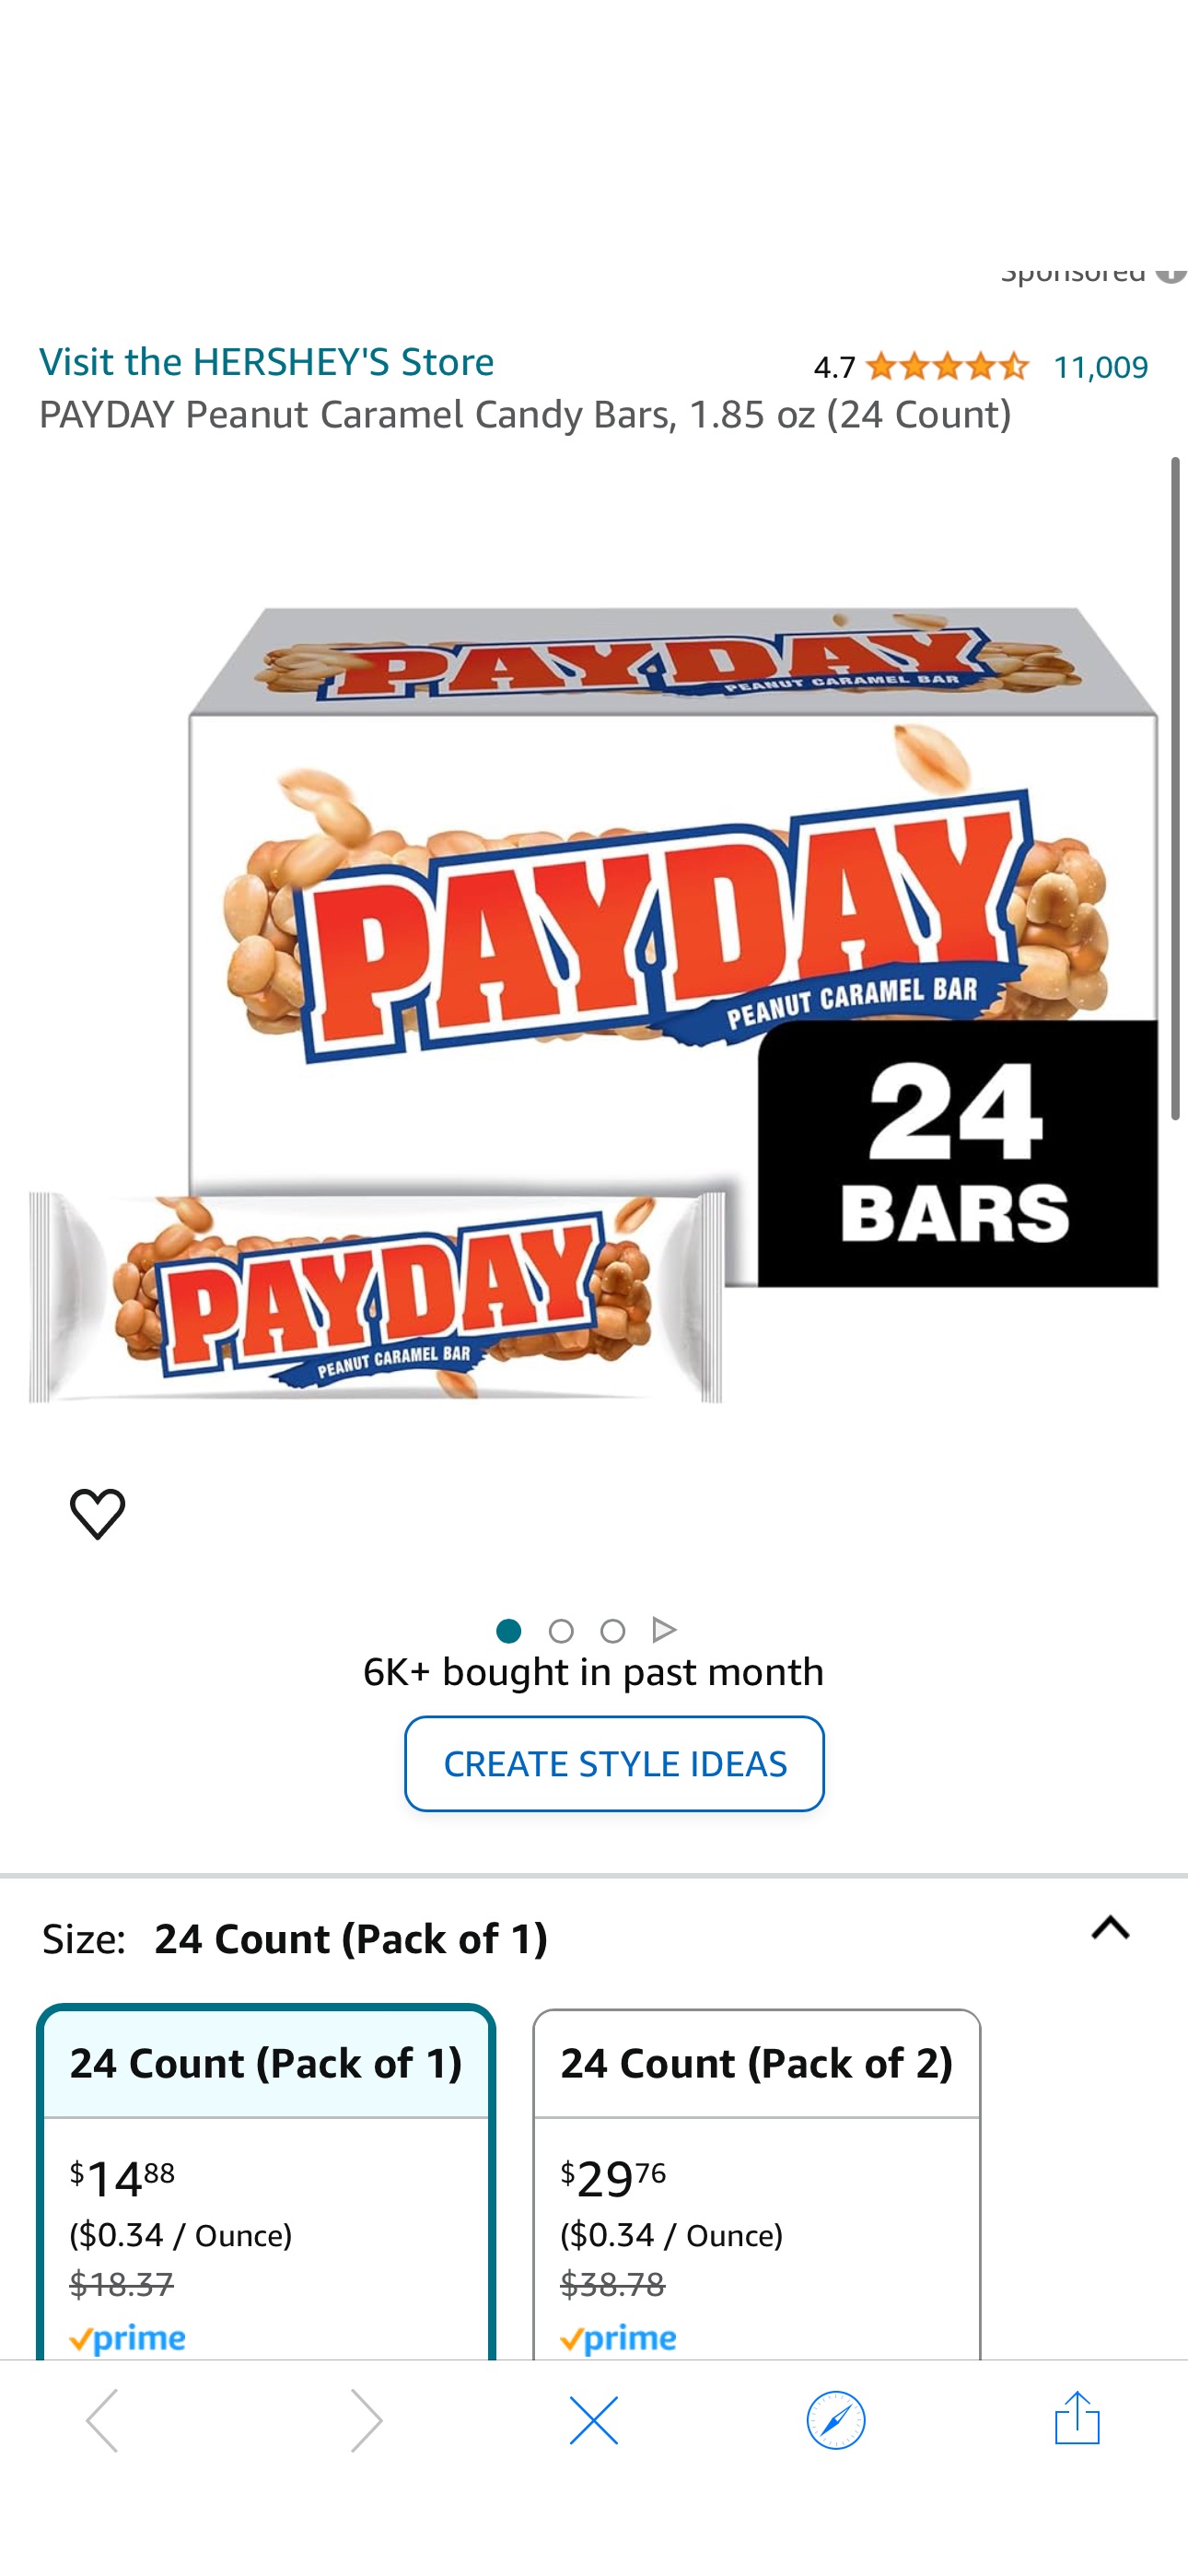 Amazon.com : PAYDAY Peanut Caramel Candy Bars, 1.85 oz (24 Count) : Candy And Chocolate Multipack Bars : Everything Else